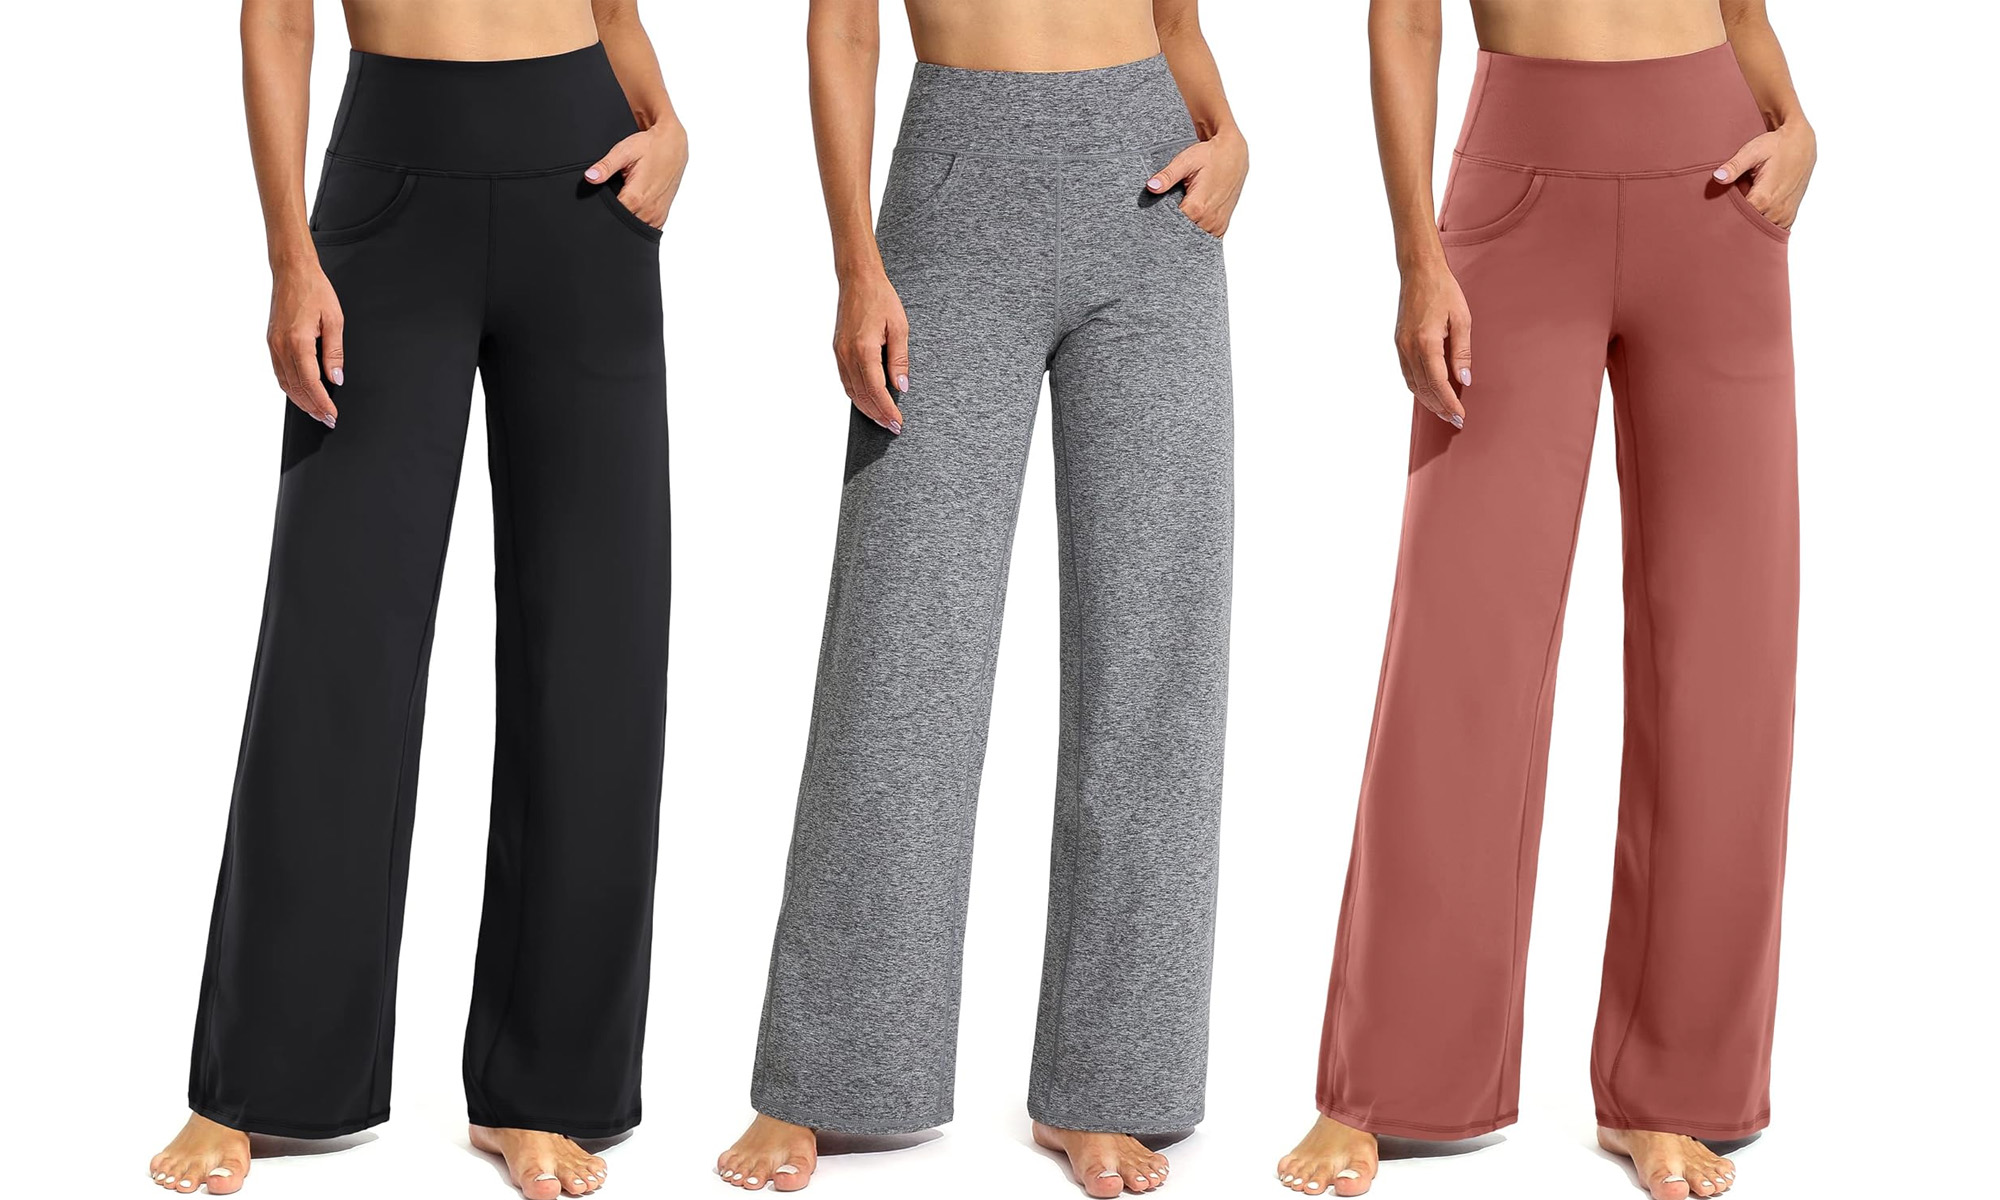 Buy Promover Flare Yoga Pants for Women with Pockets Capris